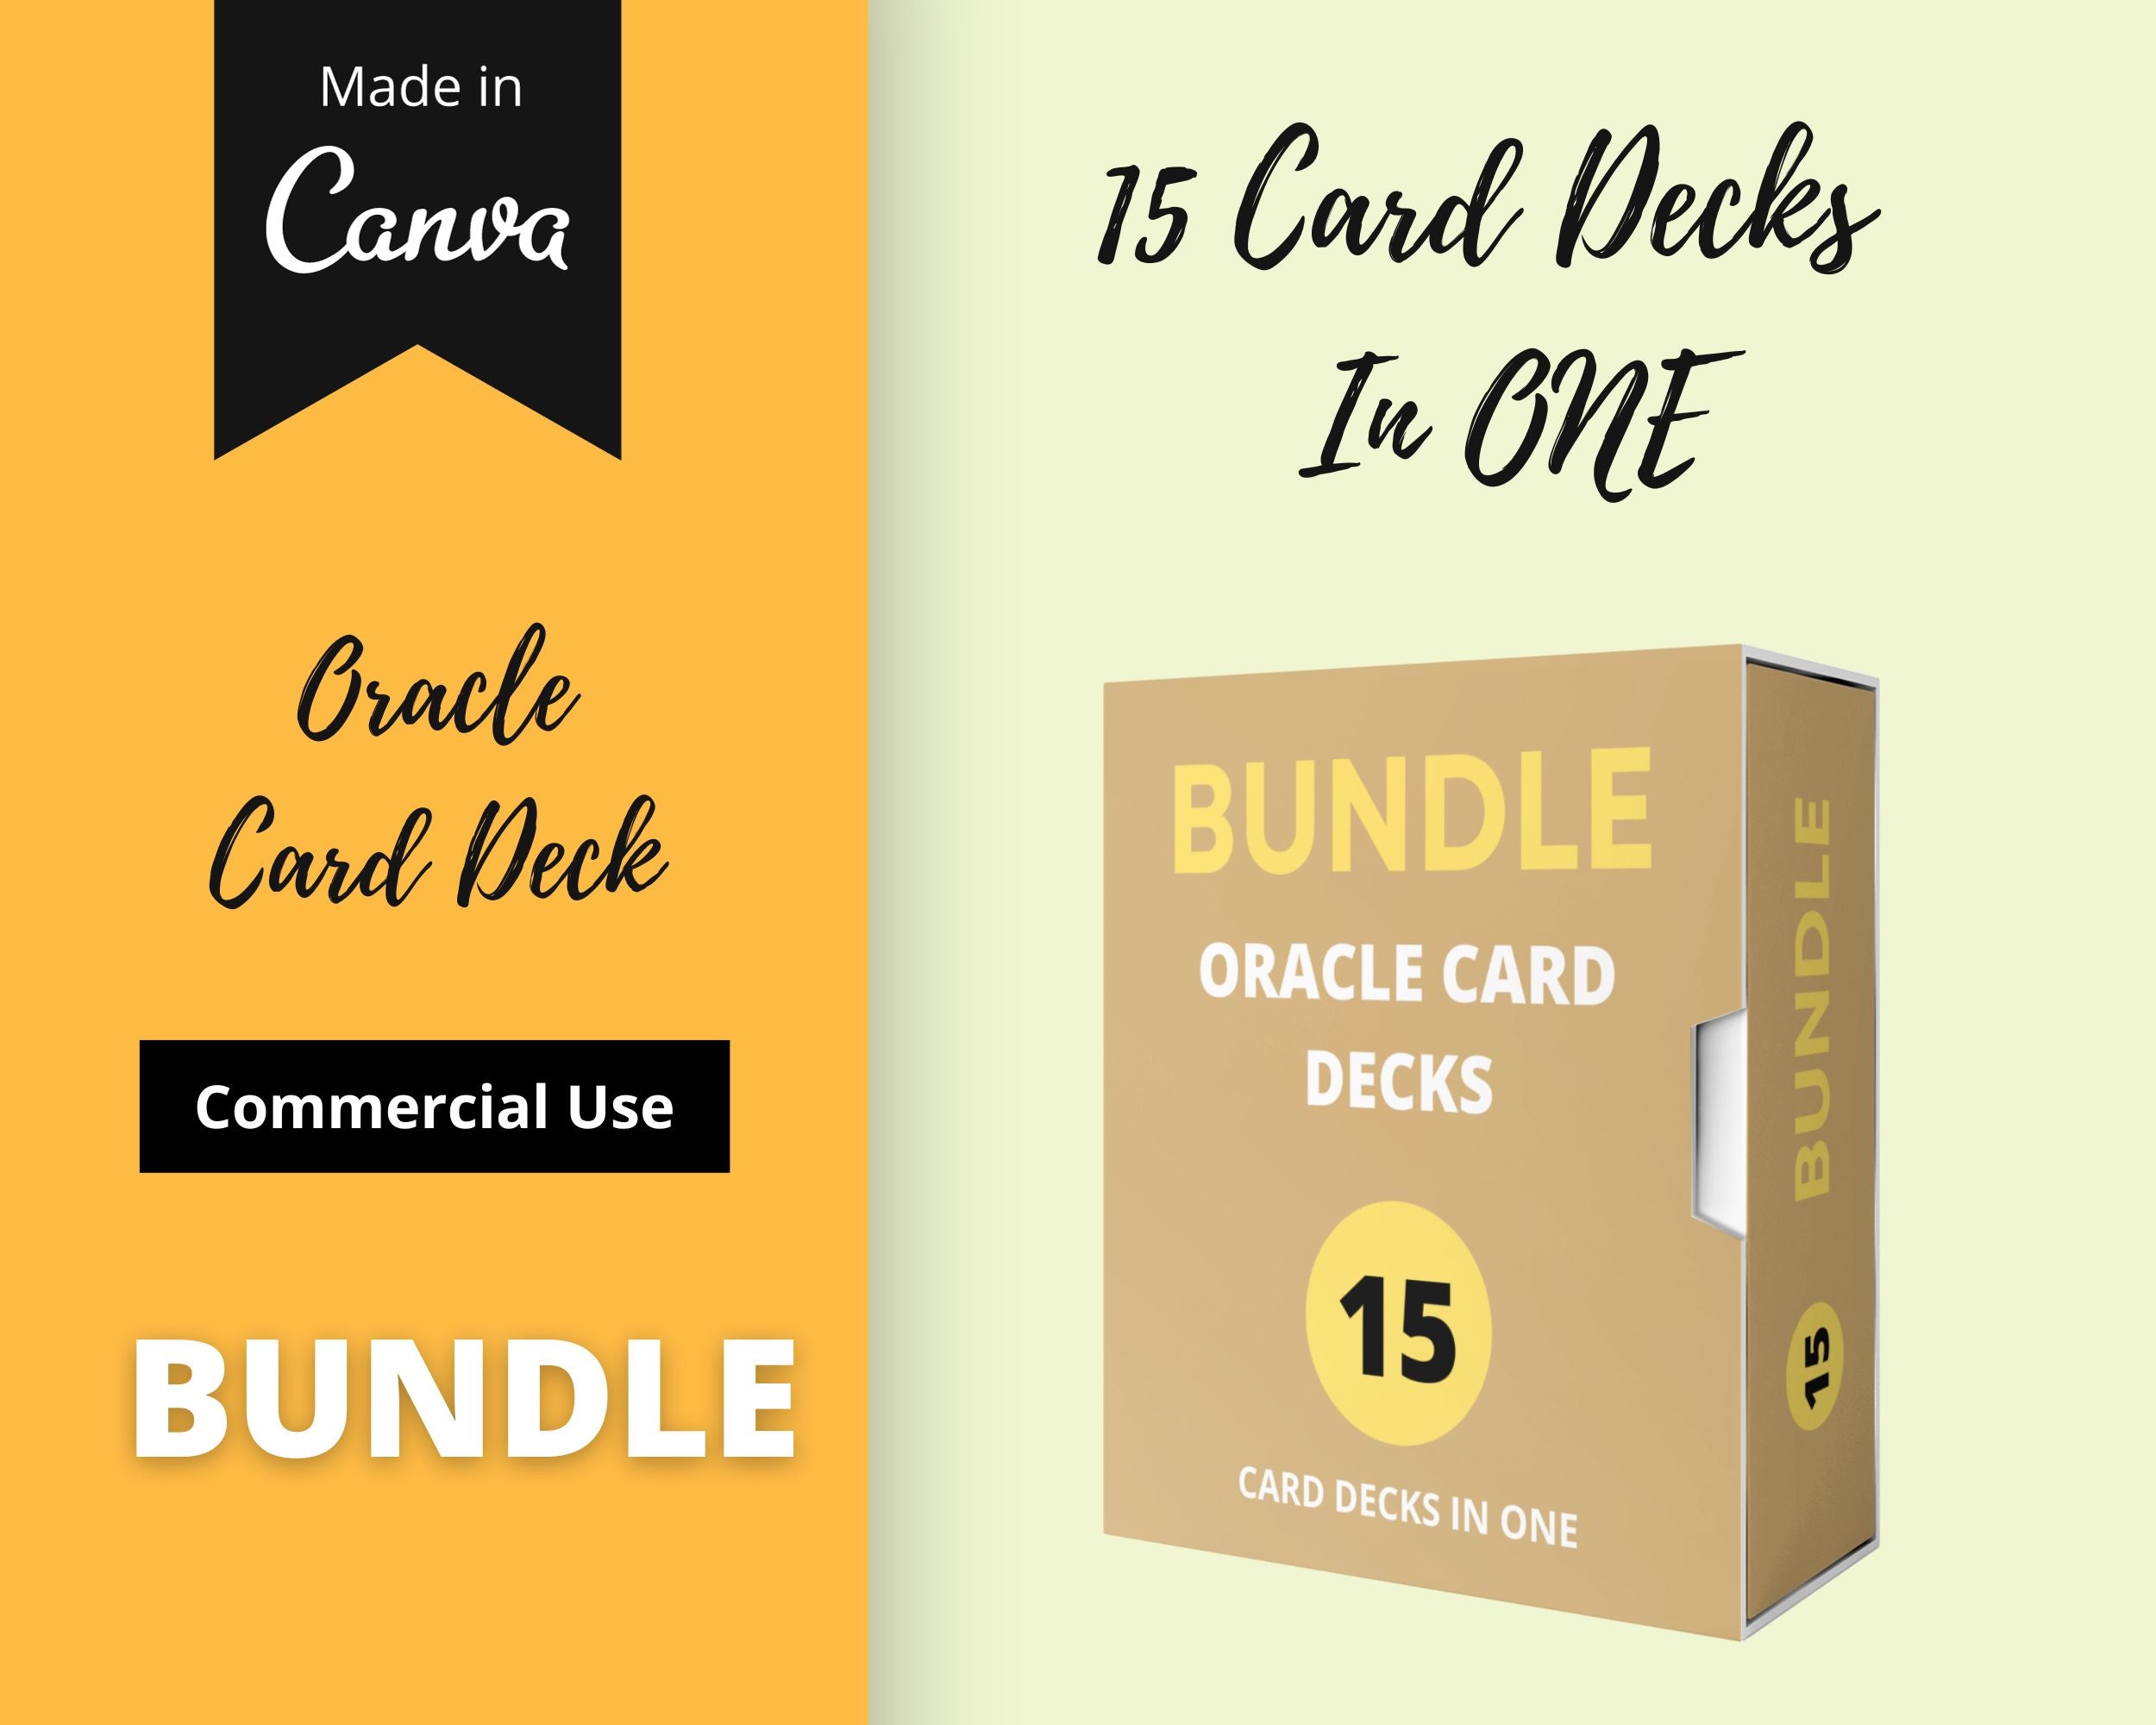 BUNDLE of 15 Cards Decks in Canva | Oracle Card Decks | Tarot Cards | Inspirational Cards Commercial Use